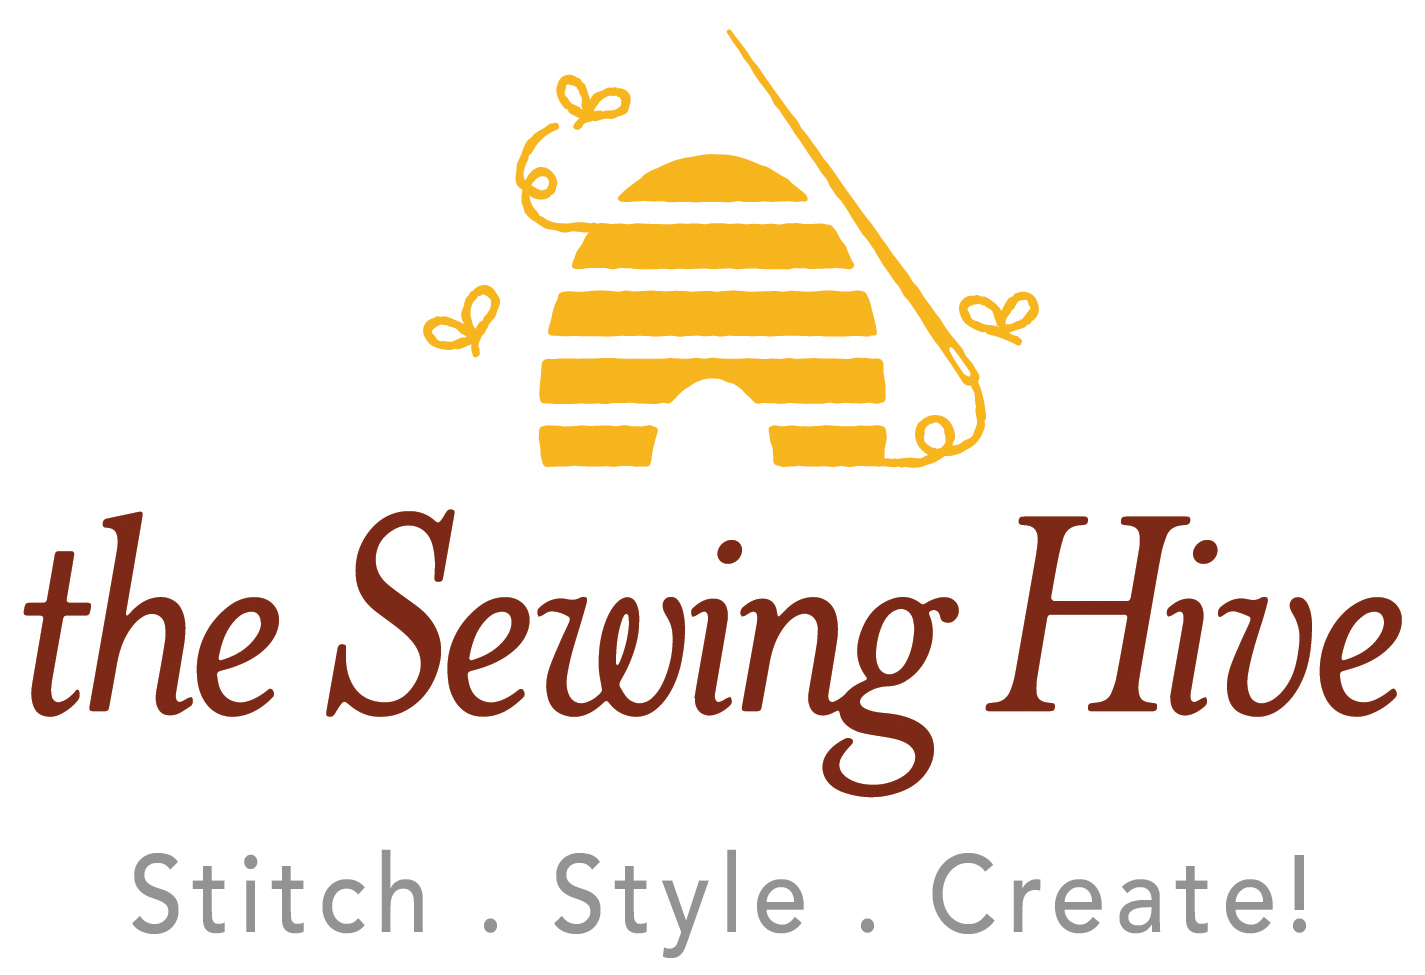 The Sewing Hive